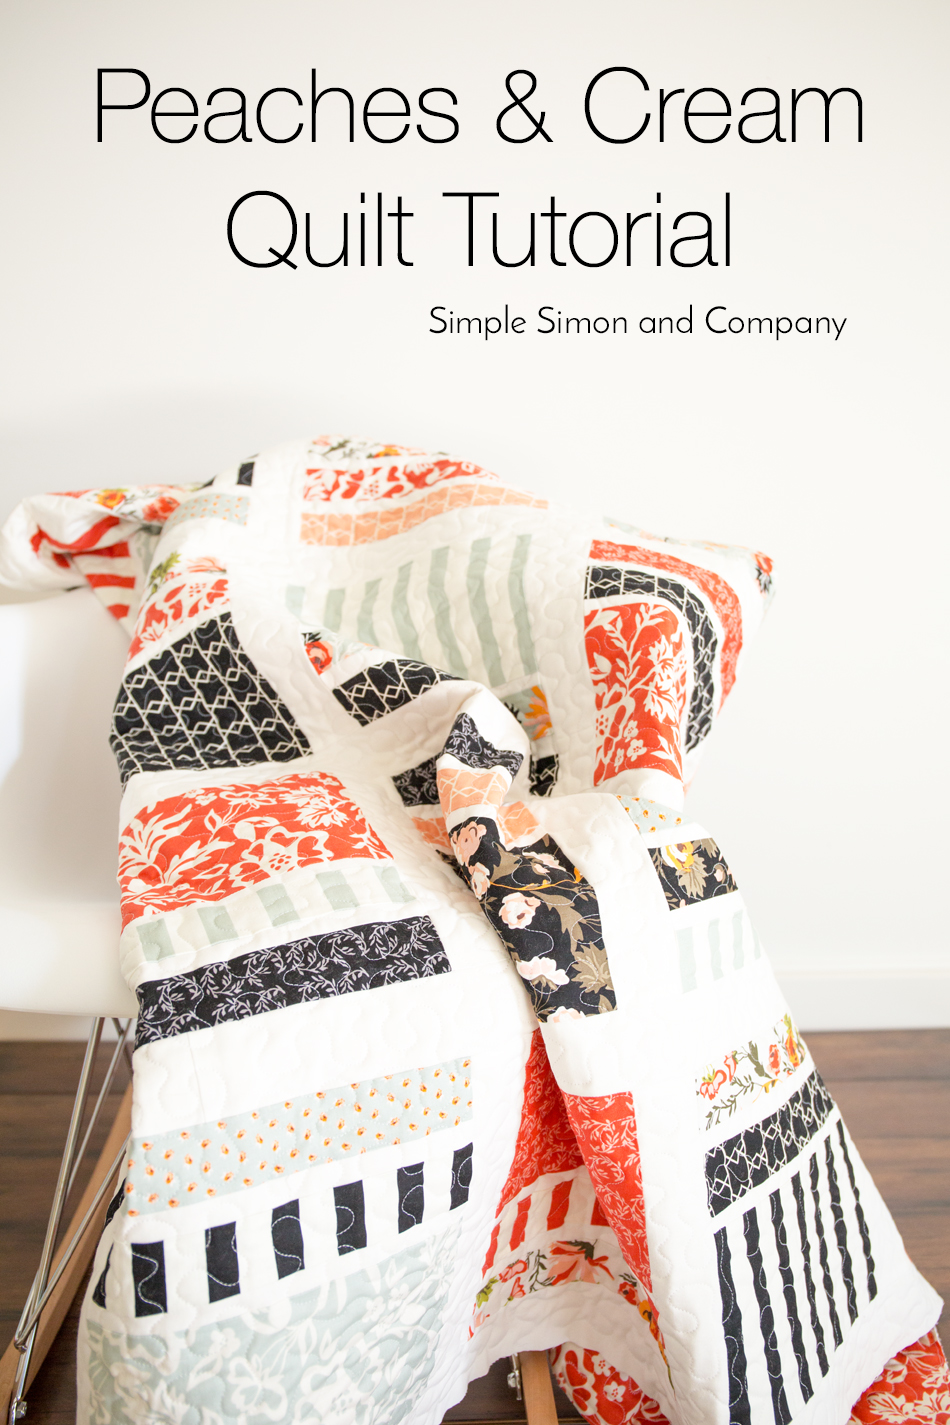 Peaches and Cream Quilt Tutorial by Simple Simon and Co